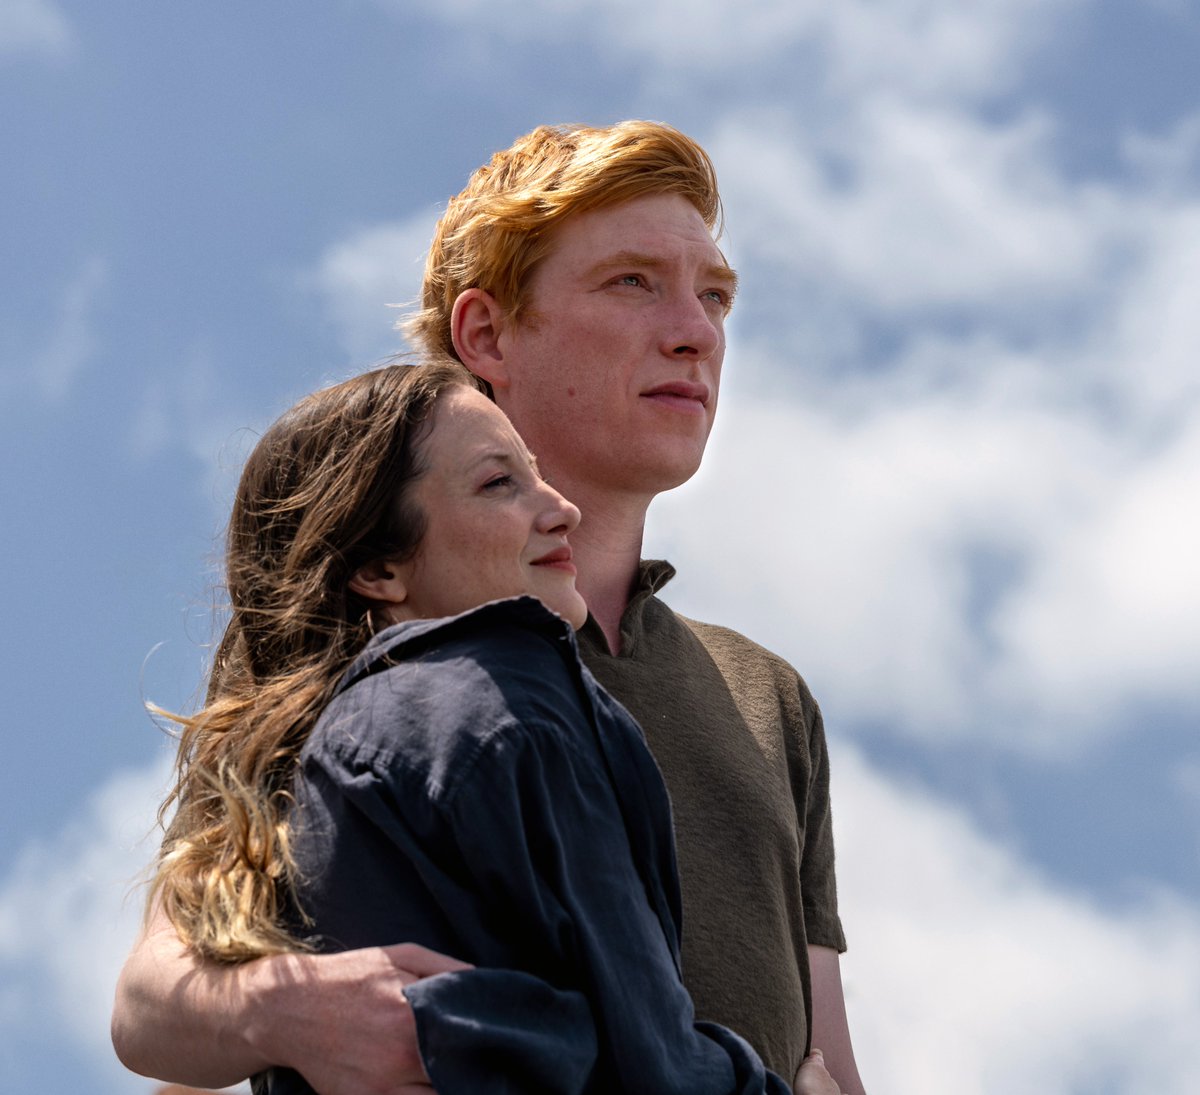 Andrea Riseborough and Domhnall Gleeson star in Alice & Jack, out now on Blu-ray, DVD & Download! 🇬🇧💿 A love story for the ages! ❤️ Order #AliceAndJack: tinyurl.com/aliceandjackdvd